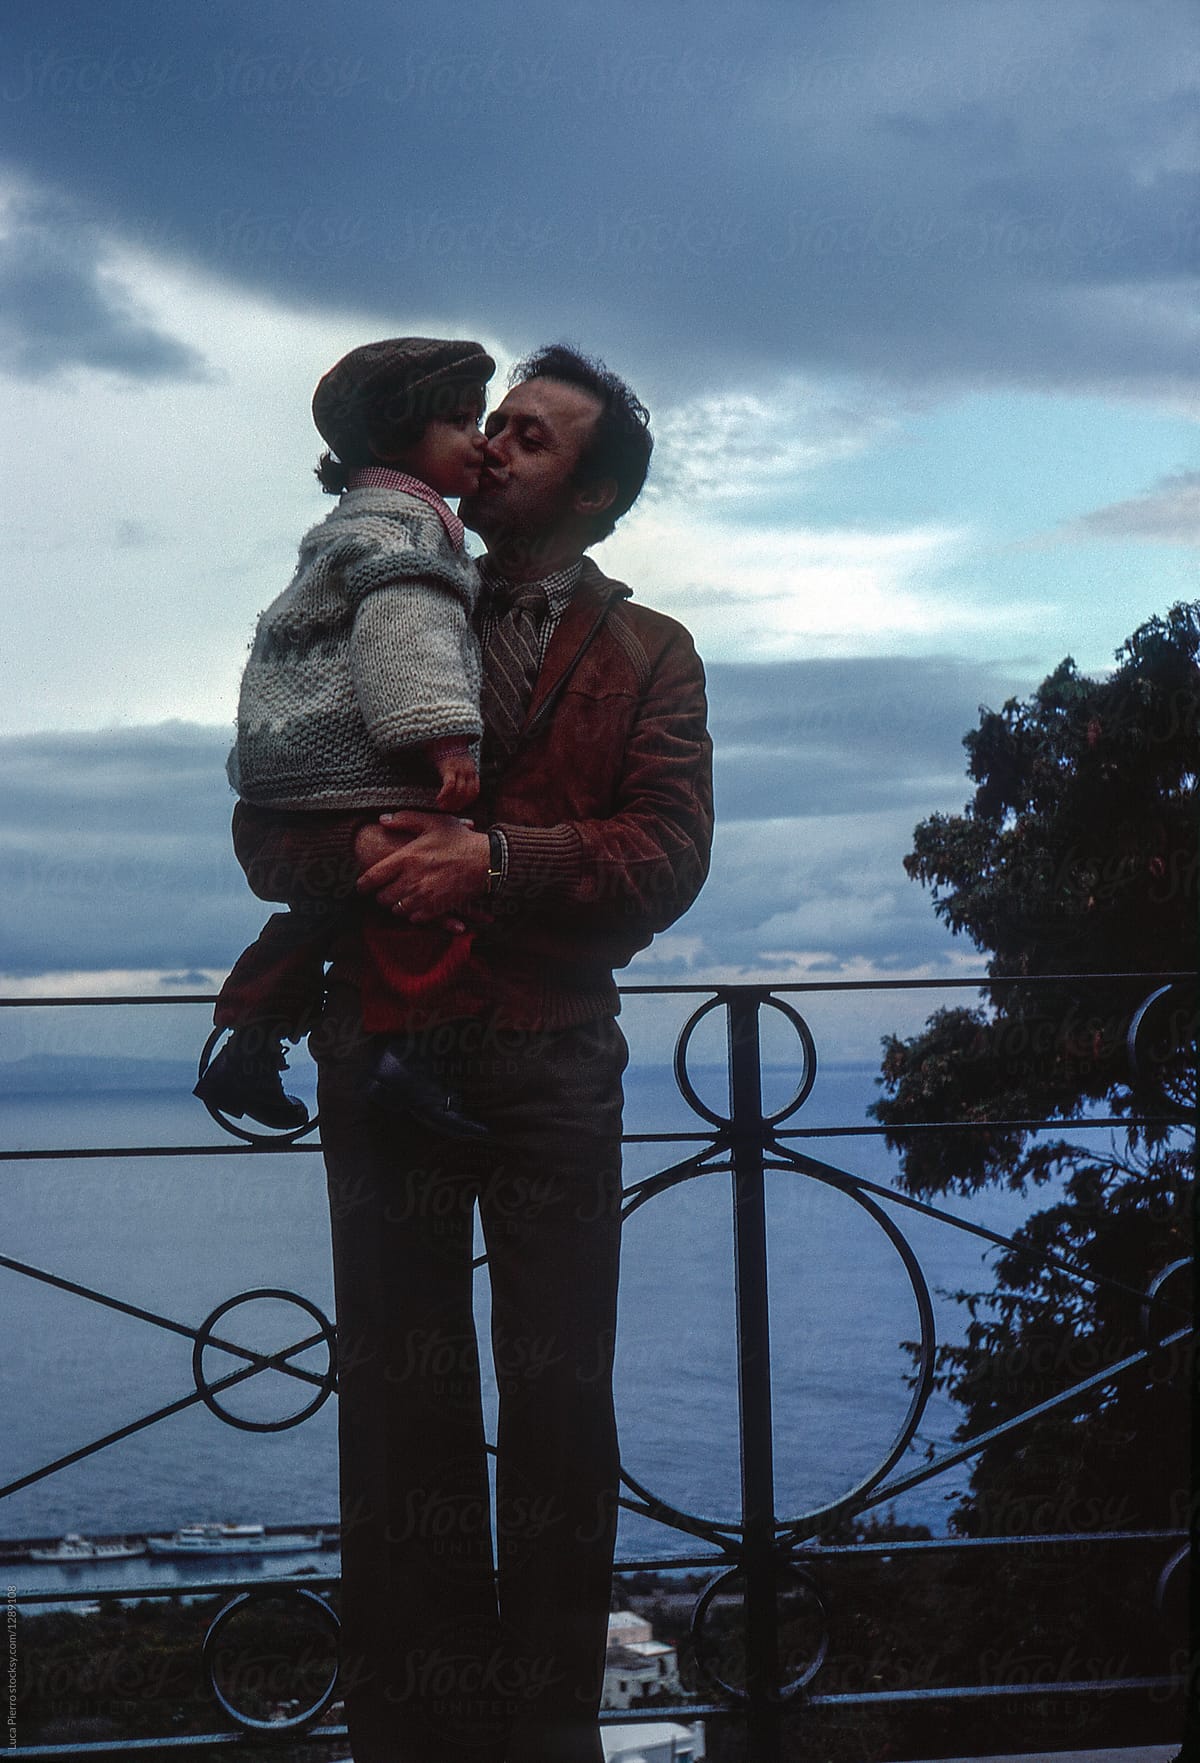 1981. Father kissing his son on the cheek